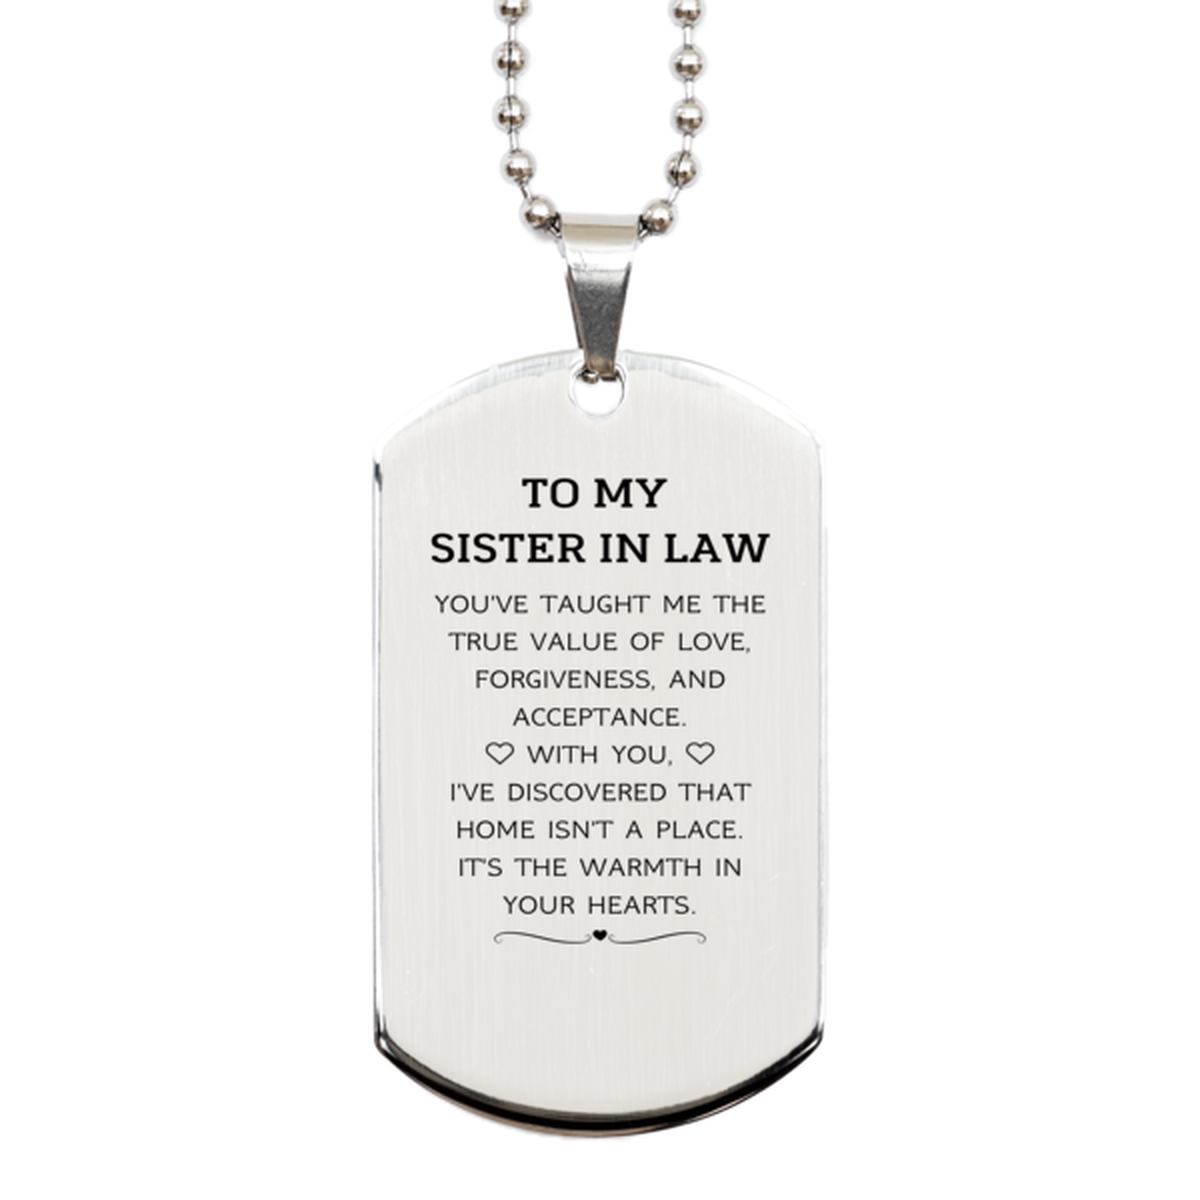 To My Sister In Law Gifts, You've taught me the true value of love, Thank You Gifts For Sister In Law, Birthday Silver Dog Tag For Sister In Law